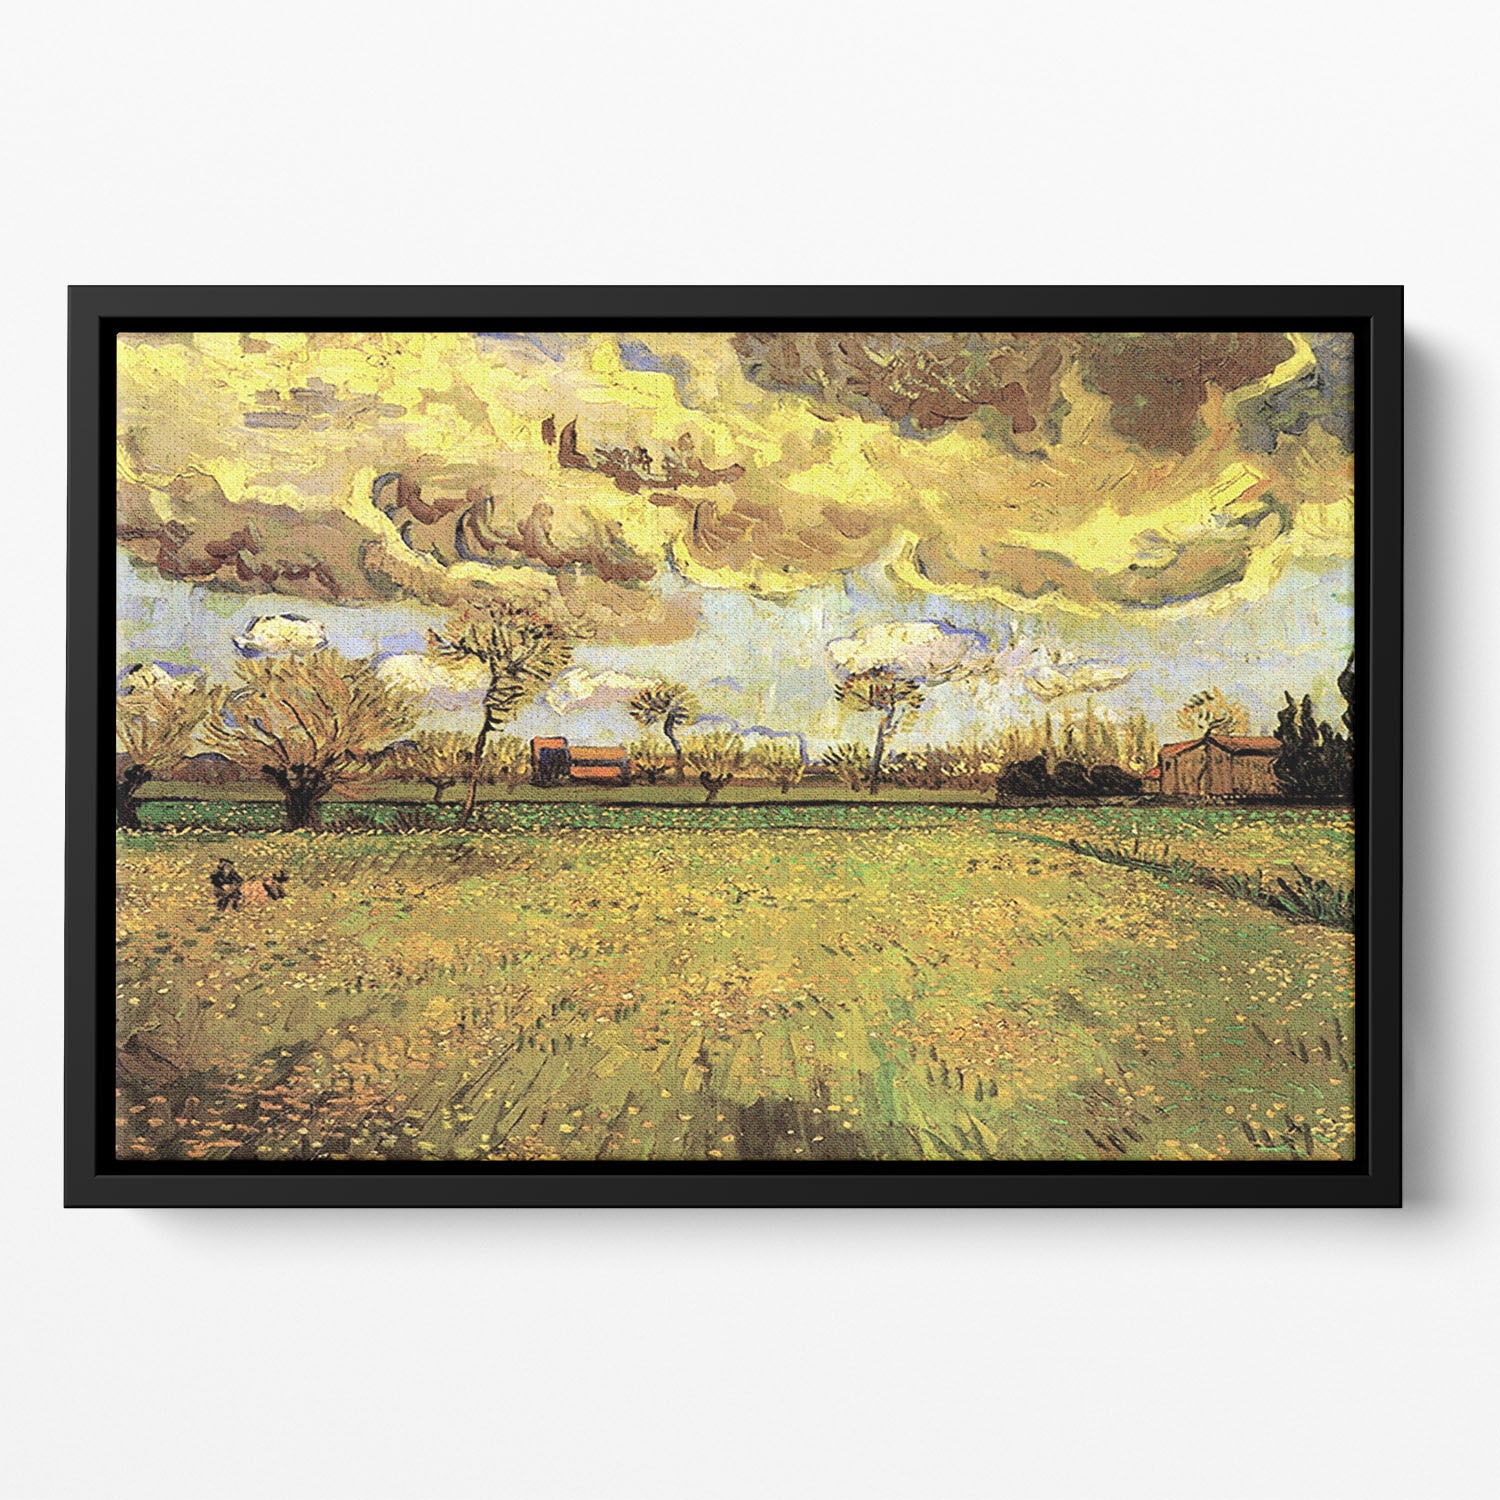 Landscape Under a Stormy Sky by Van Gogh Floating Framed Canvas